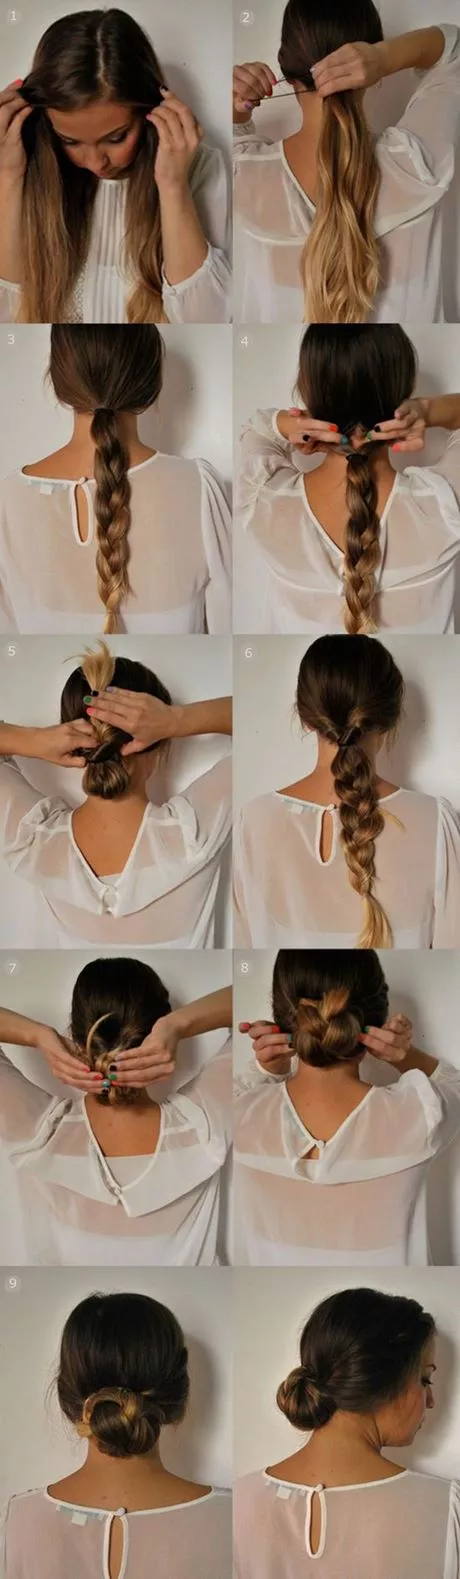 Cute really easy hairstyles cute-really-easy-hairstyles-27_6-12-12